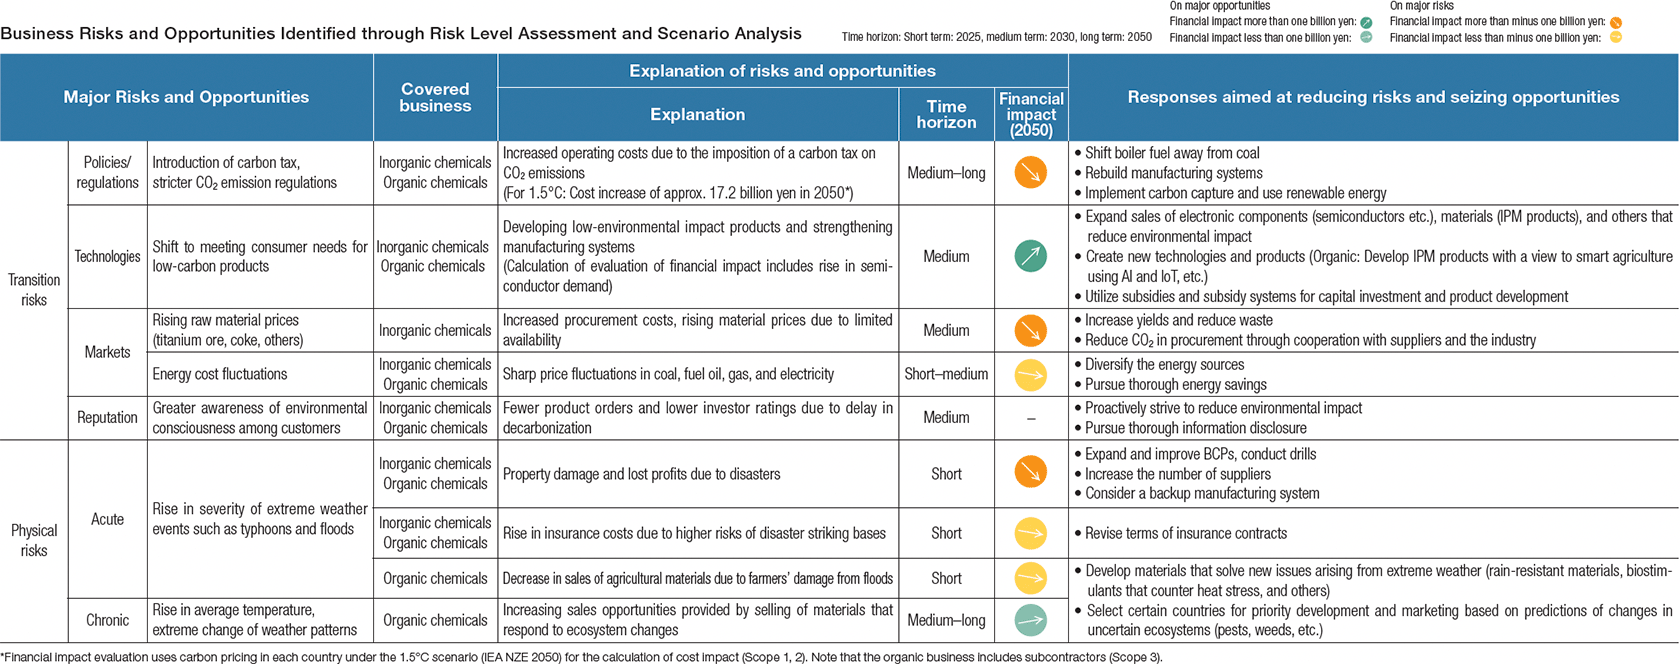 Table: Business Risks and Opportunities Identified through Risk Level Assessment and Scenario Analysis (Inorganic Chemicals Business)